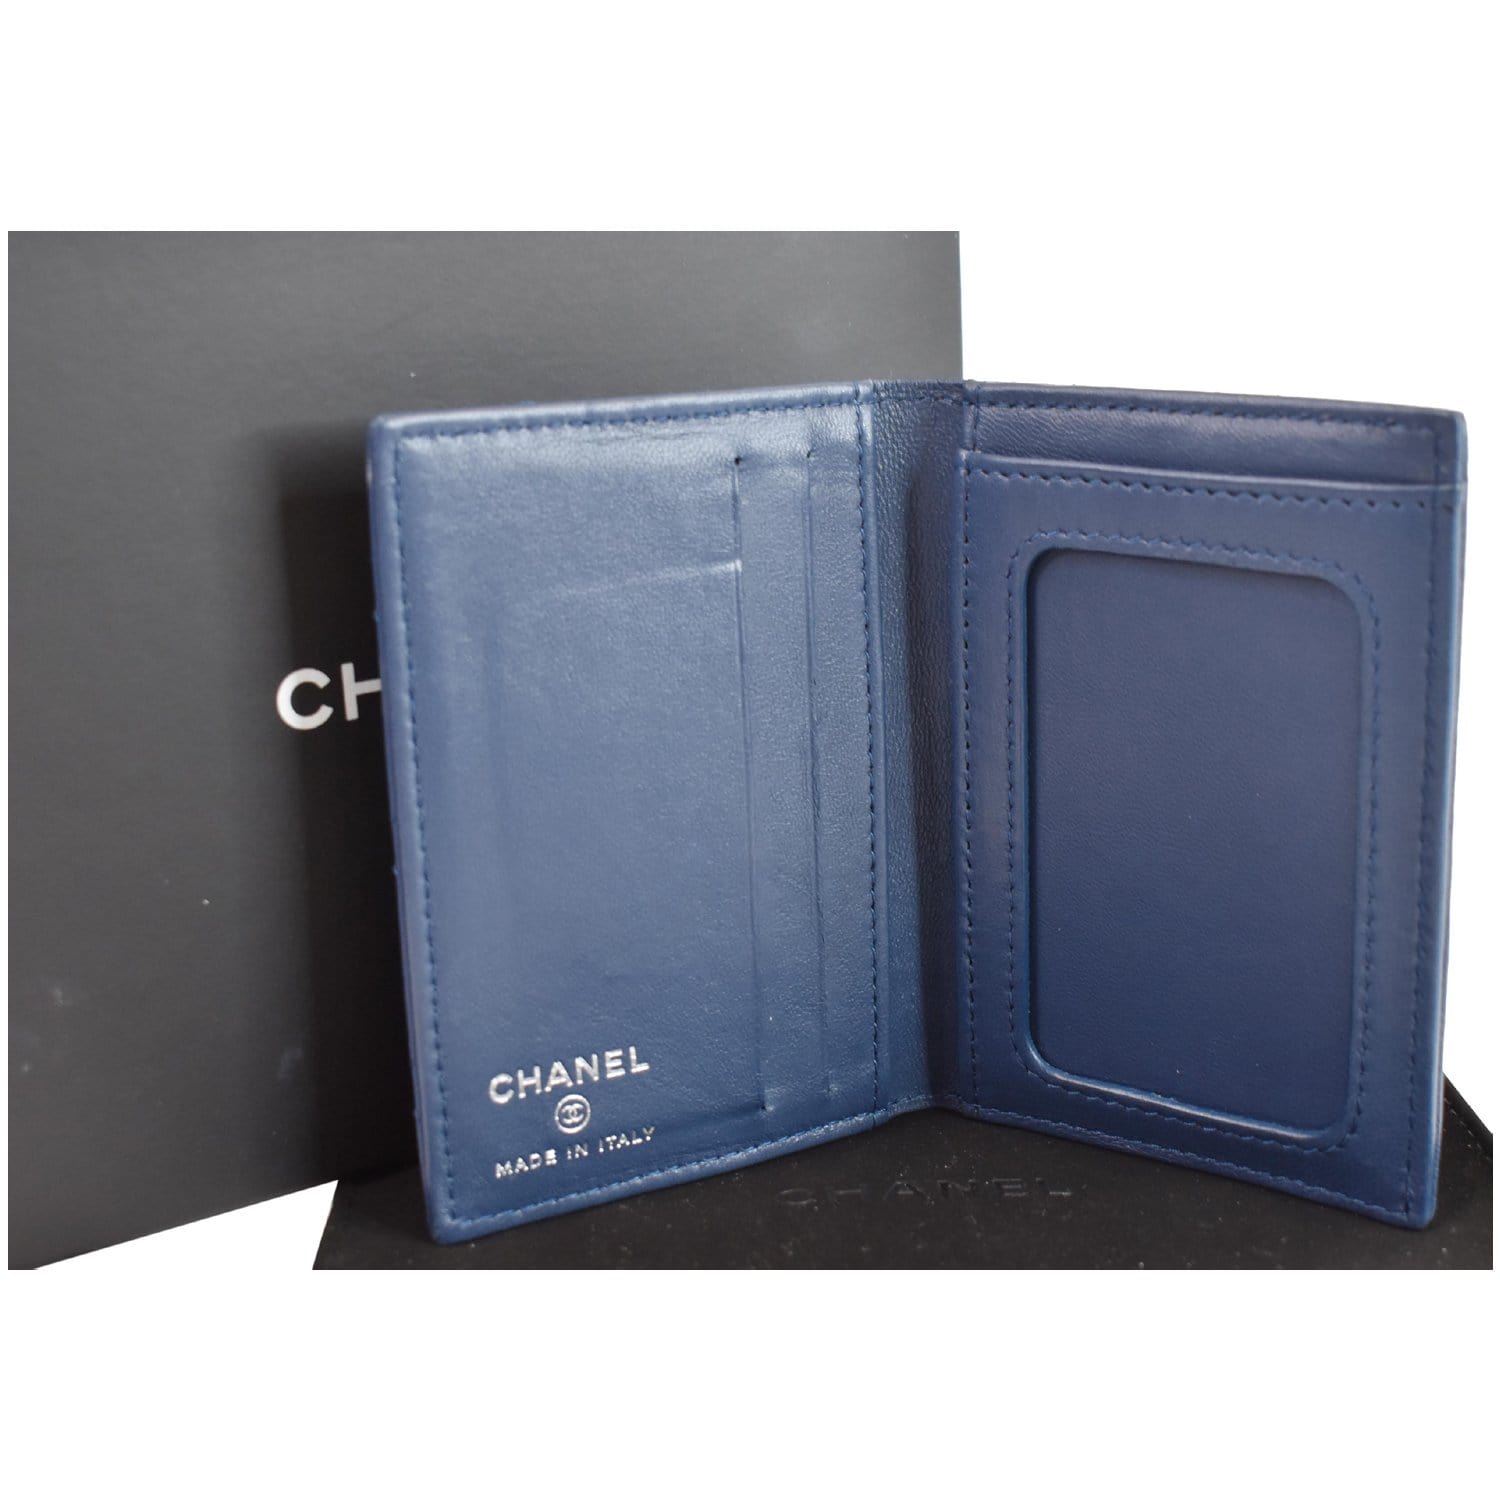 Fauré Le Page - Pay Attention 6cc Wallet Wallet - Embroidered Jacquard Blue Saga & Navy Leather